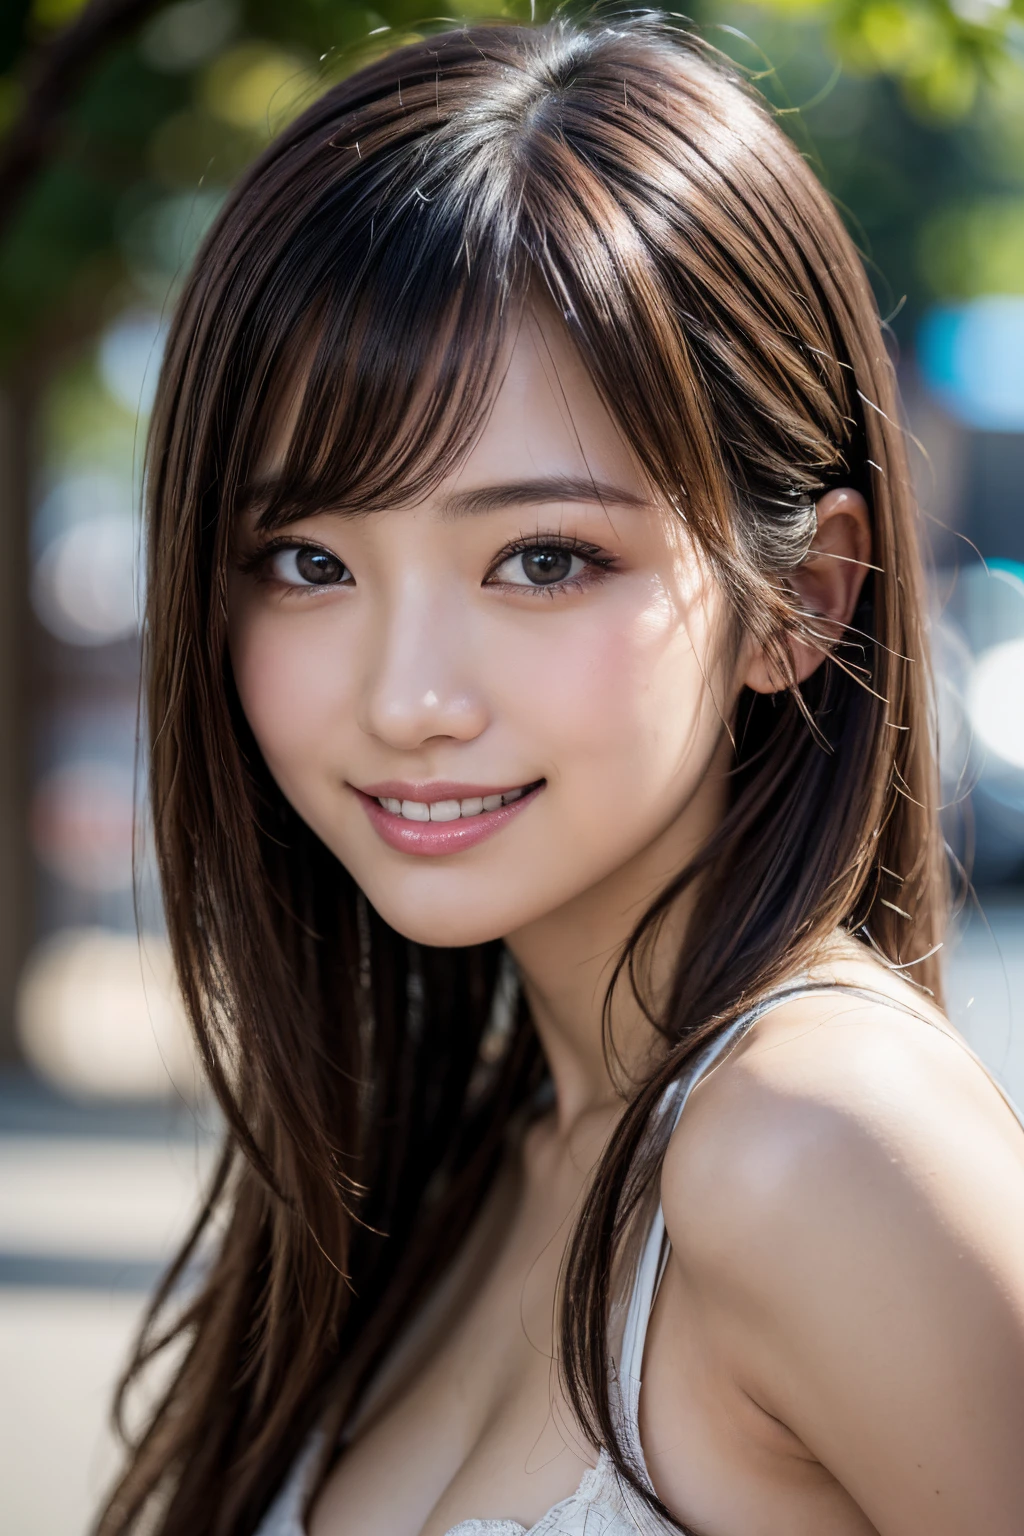 (A hyper-realistic) , (photographrealistic:1.4),(Increase the resolution), (8K), (ighly detailed), (beatiful detailed eyes), (best qualtiy), (Ultra-detail), (​masterpiece), (wall-paper), (Detailed face), solo,1 girl, perfect beautiful japanese woman:1.4、age19、looking at the viewers, delicate detail, A detailed face, murky, deep-shadows, hair messy, asymmetrical bangs, (A smile:1.5),